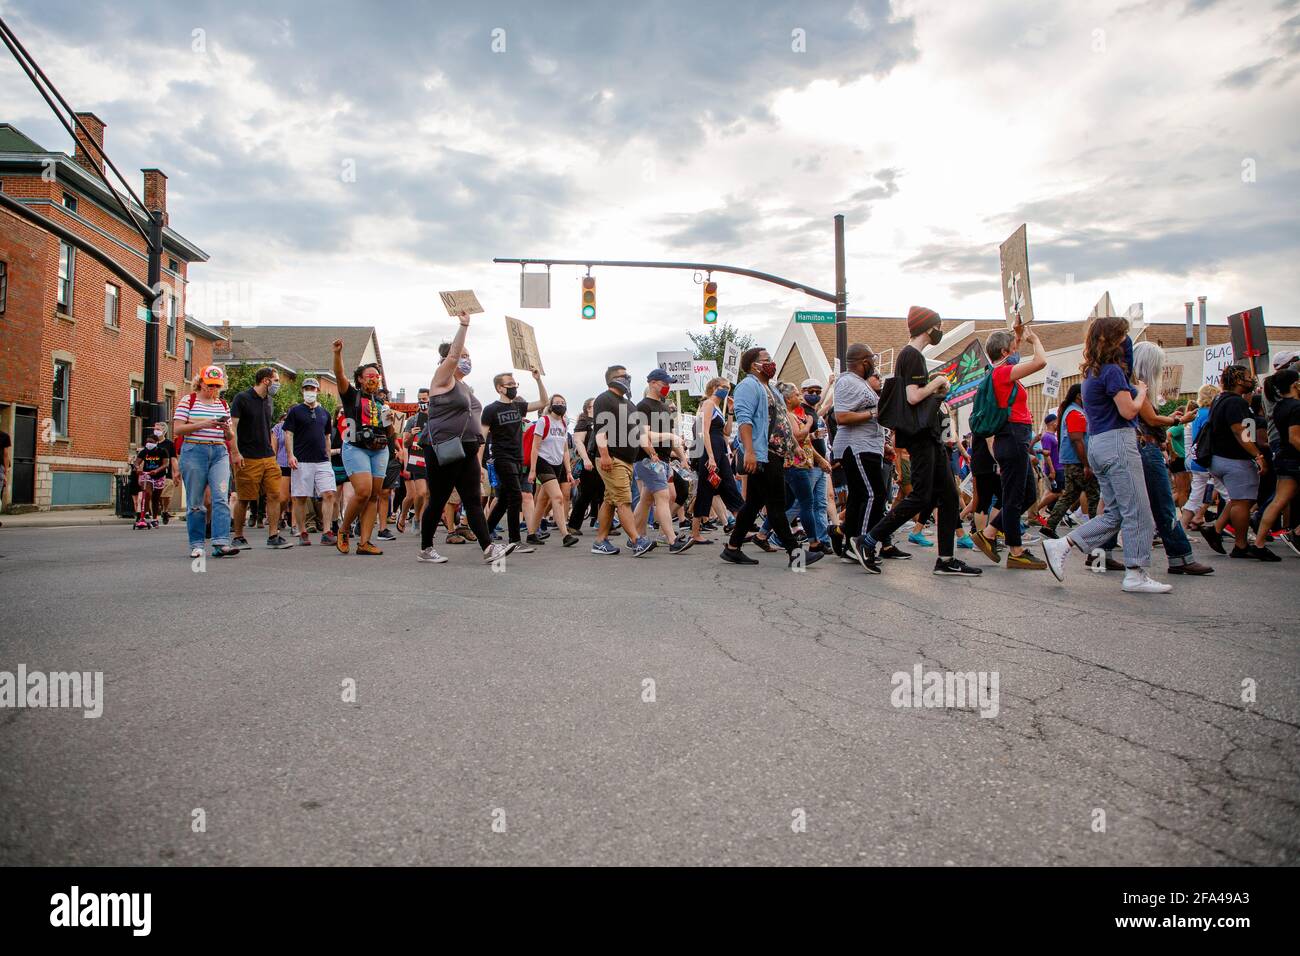 A large group of protestors march peacefully down street holding signs Stock Photo